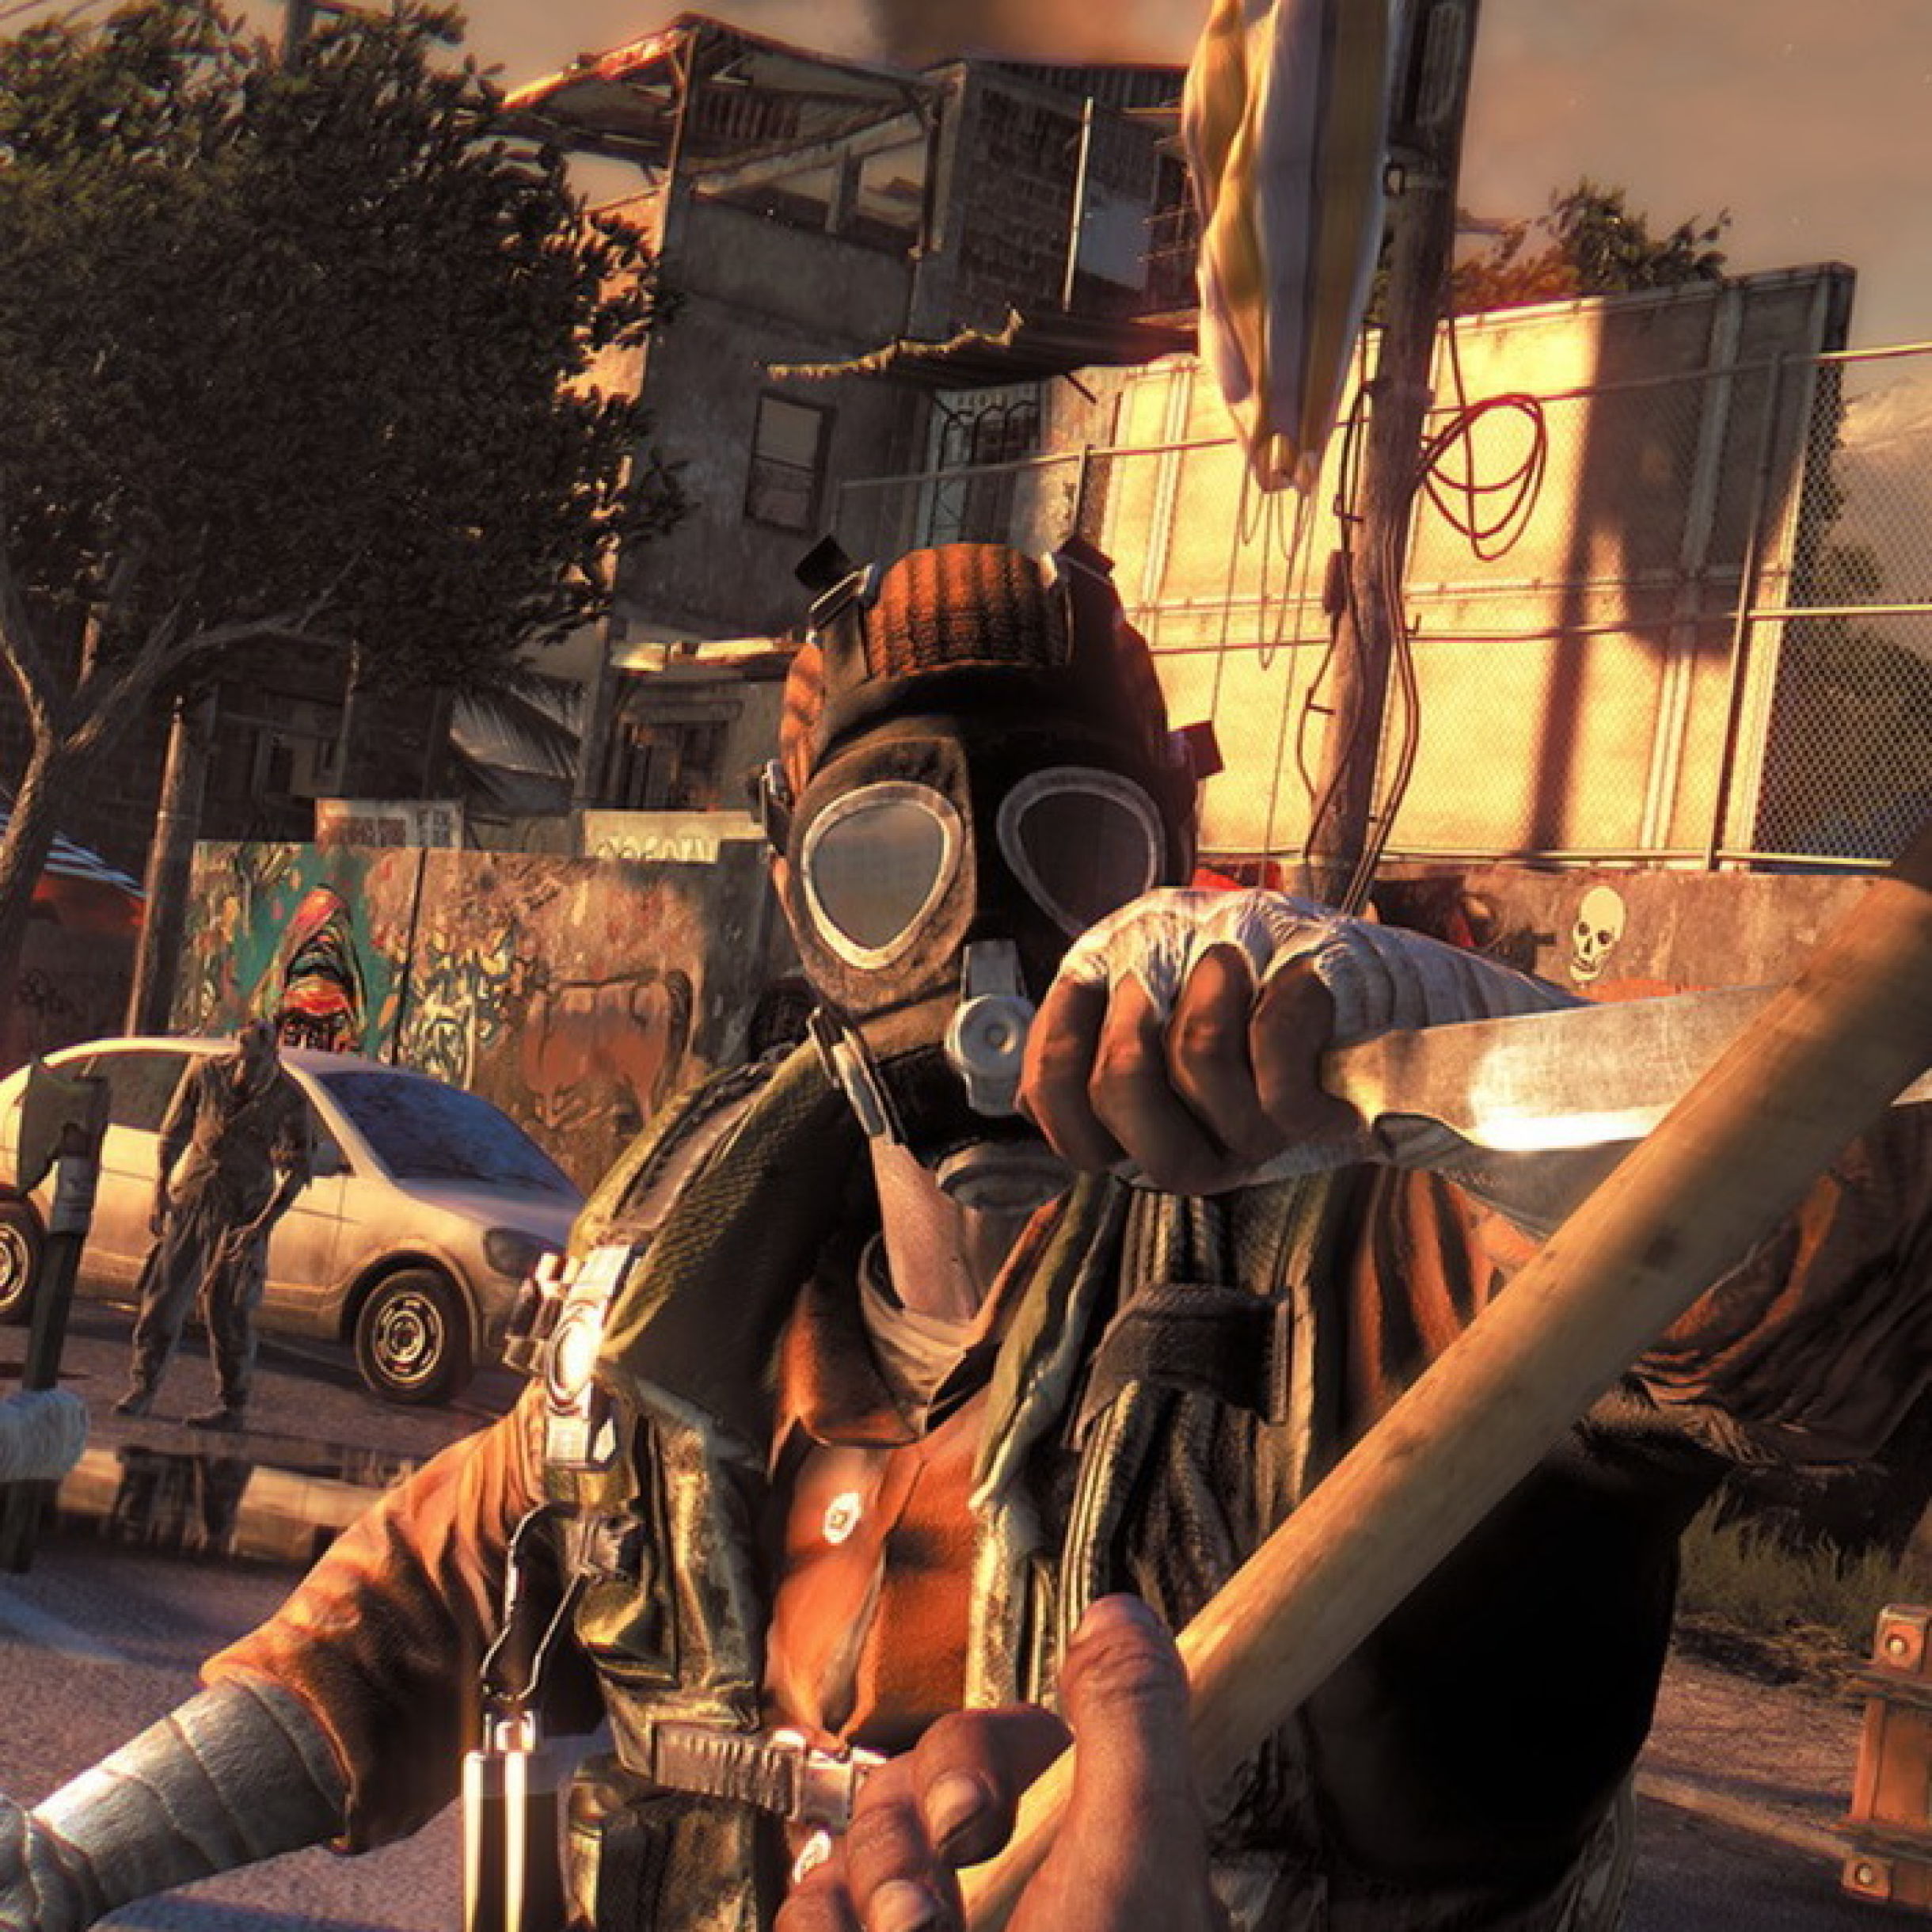 Dying Light 2 Shows Extended Gameplay In New Story Trailer